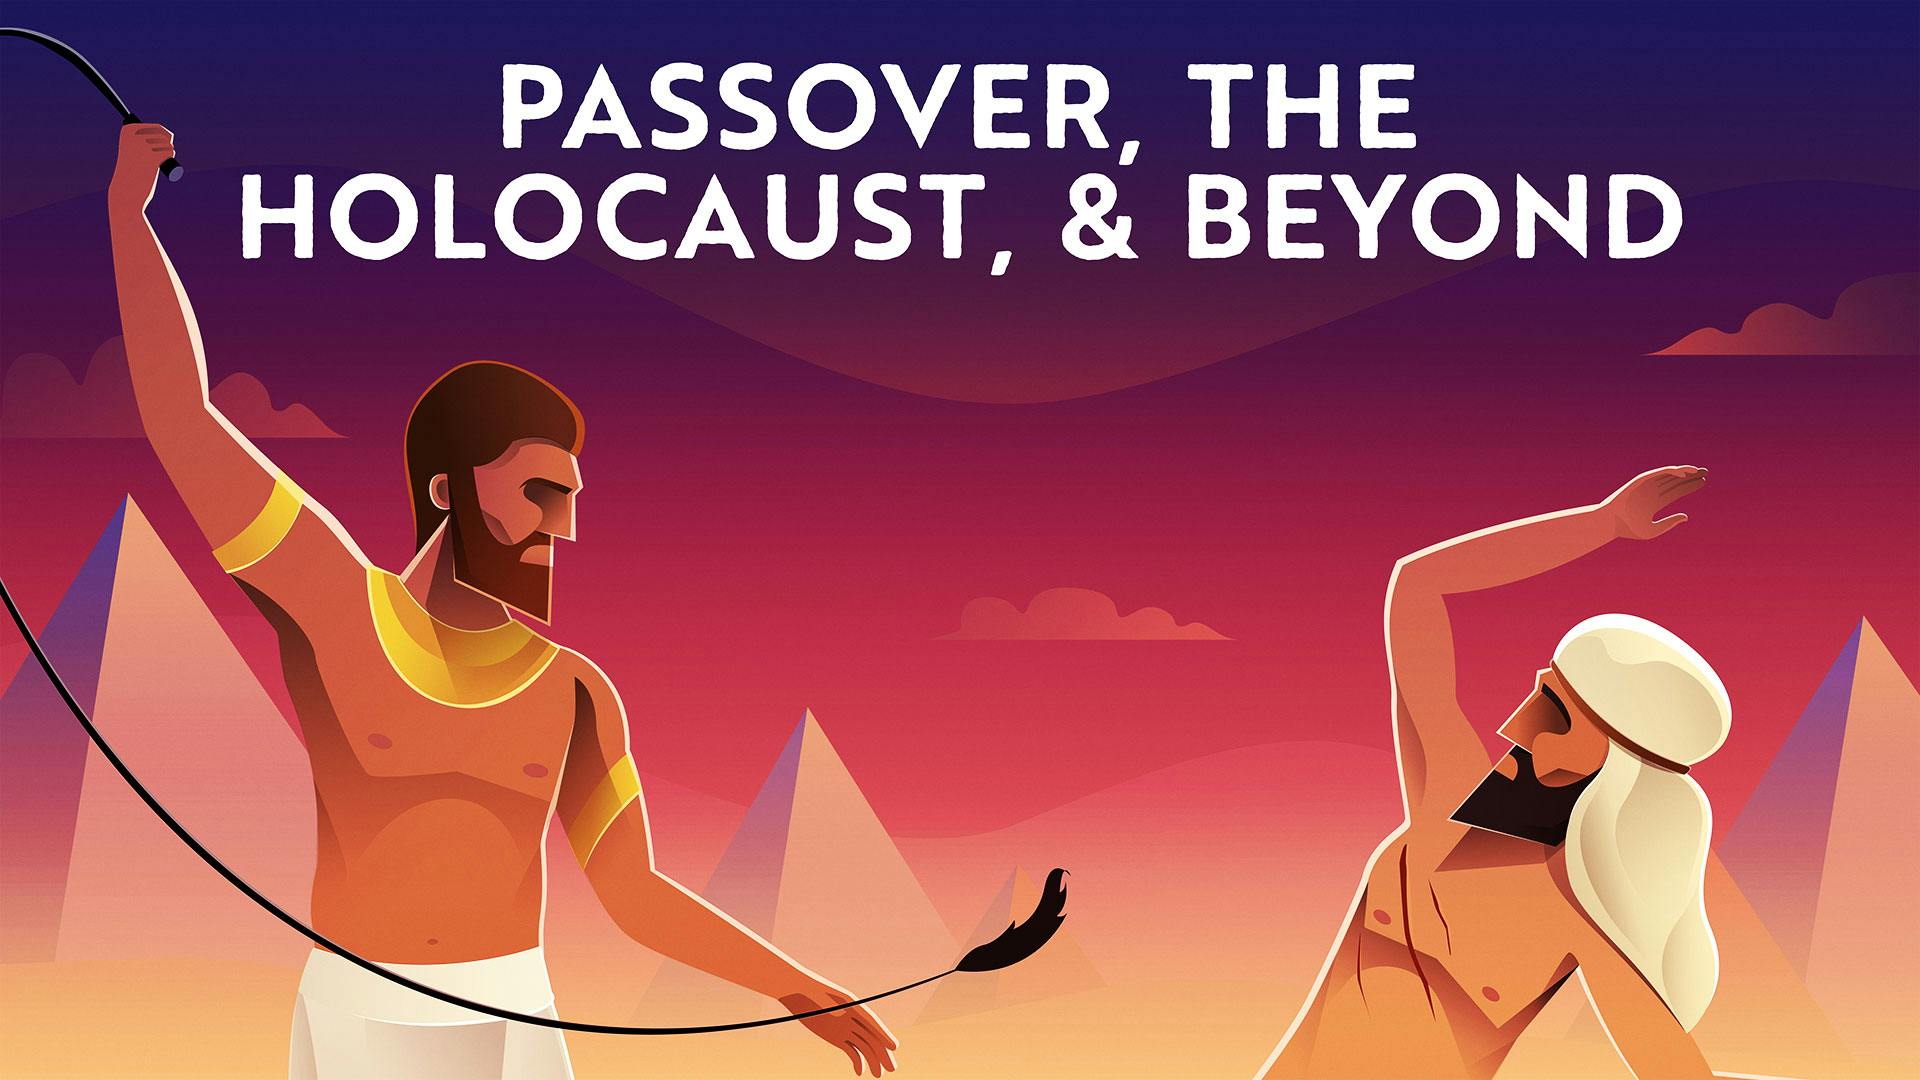 Passover, The Holocaust, & Beyond: What Can We Expect Of Divine Justice?